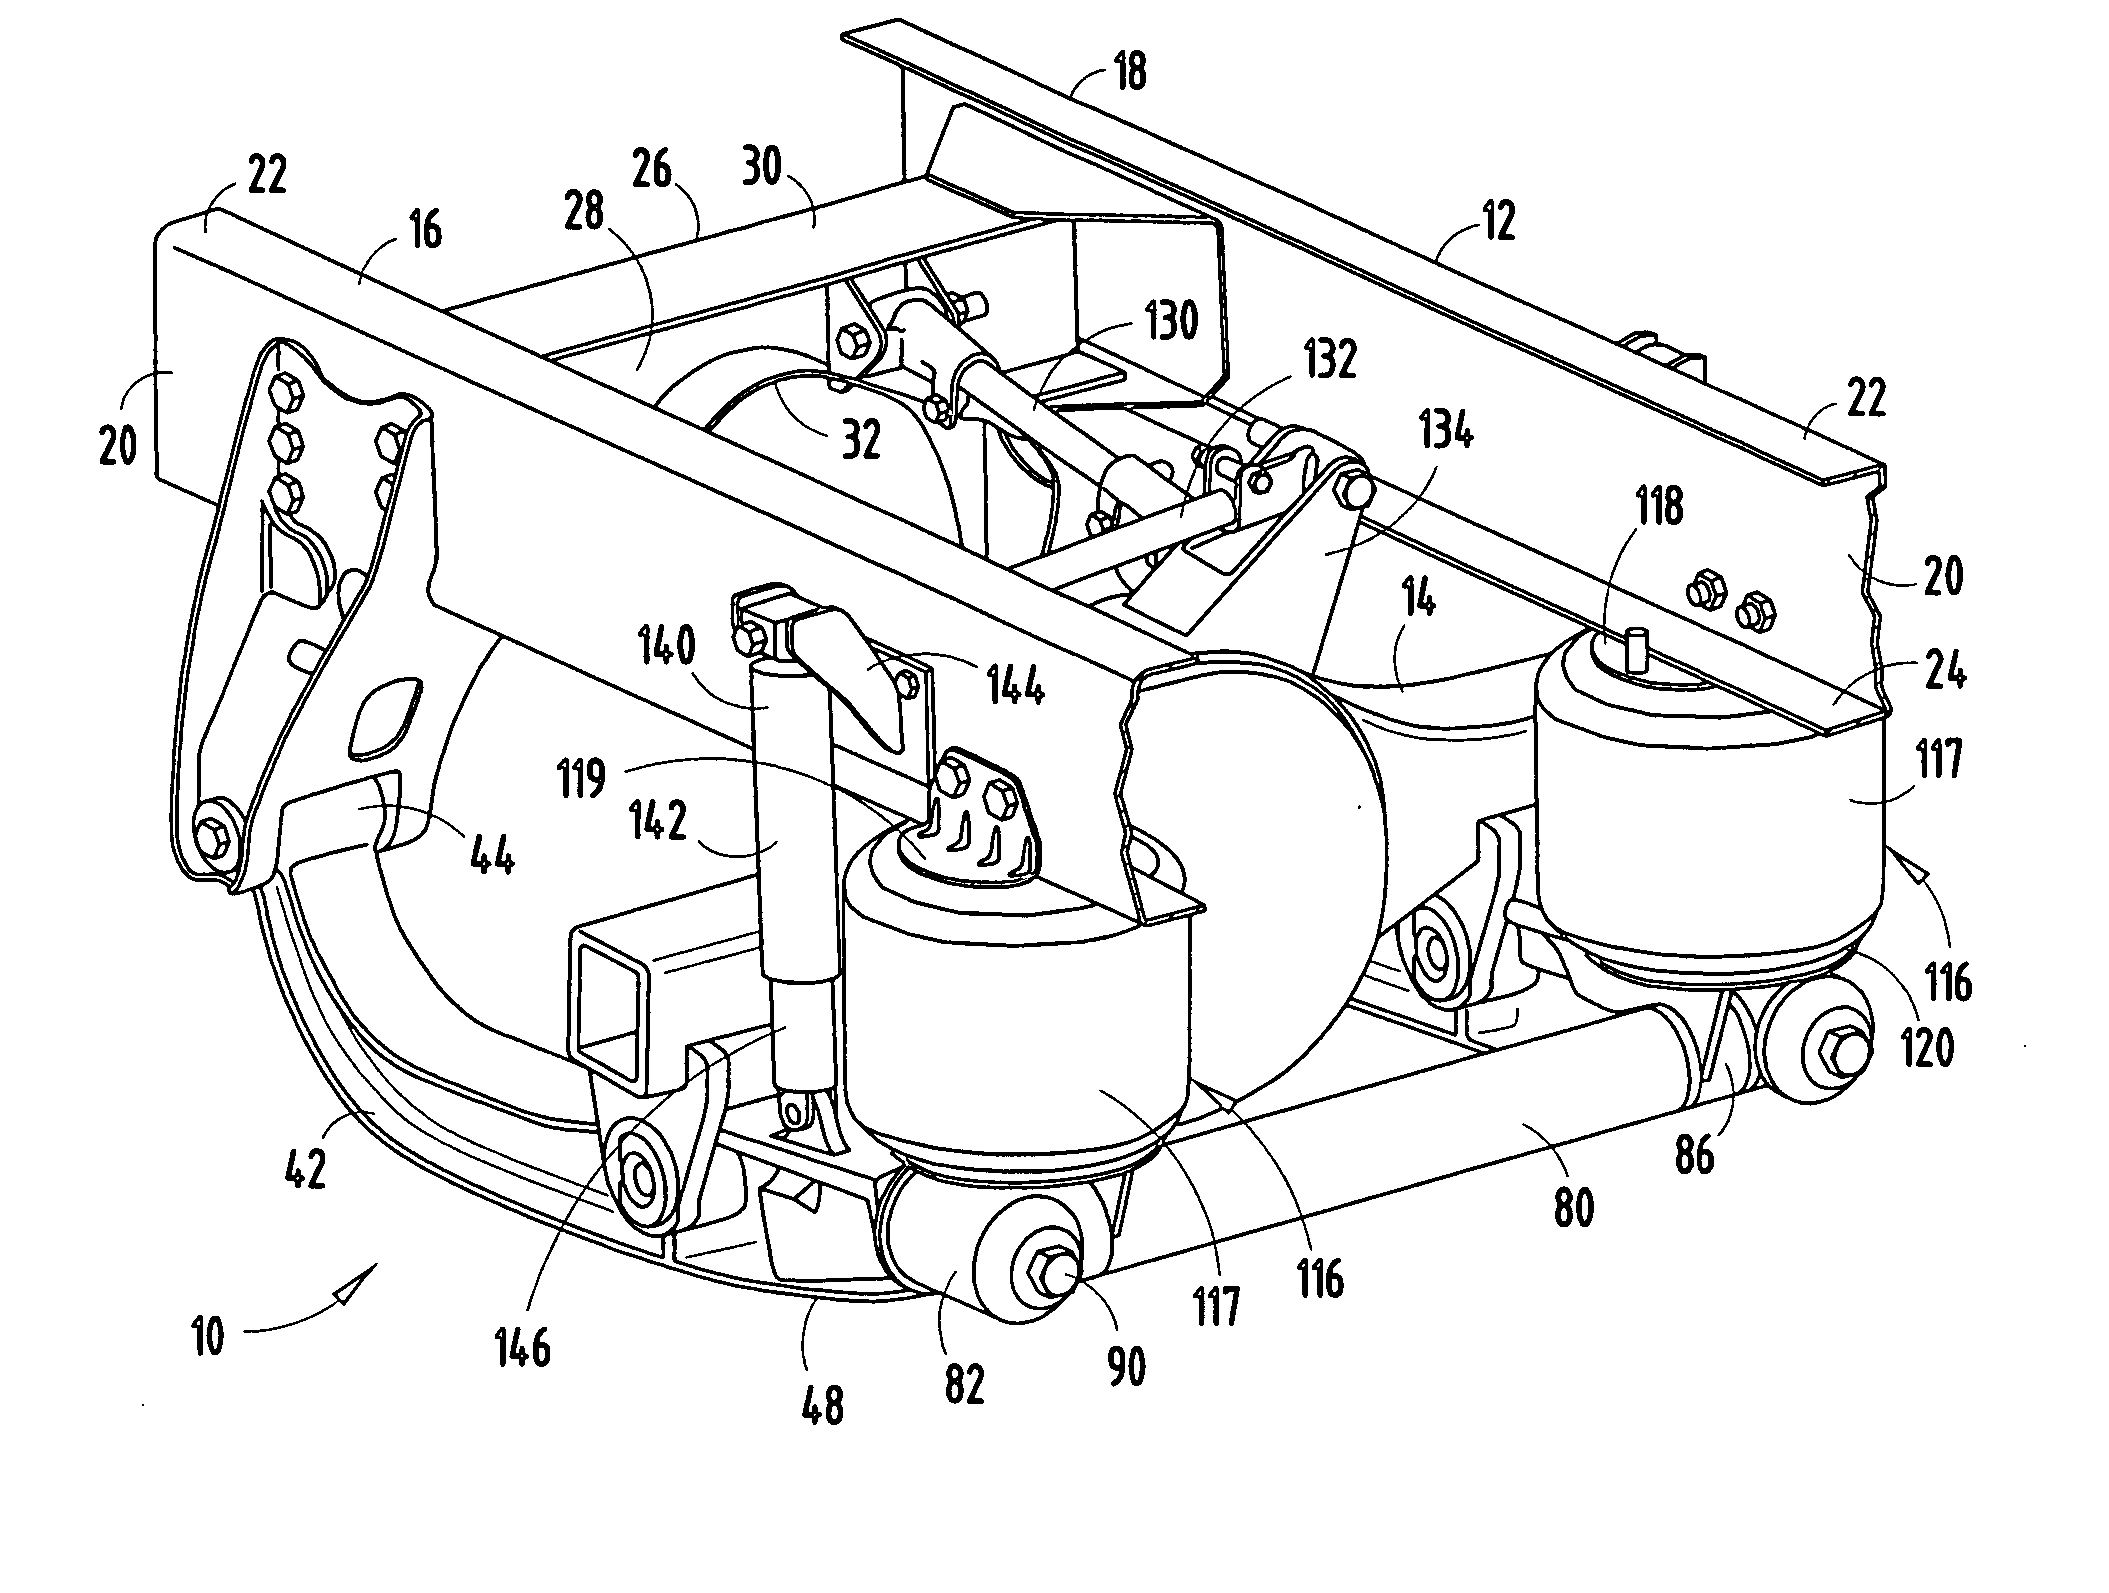 Vehicle suspension assembly